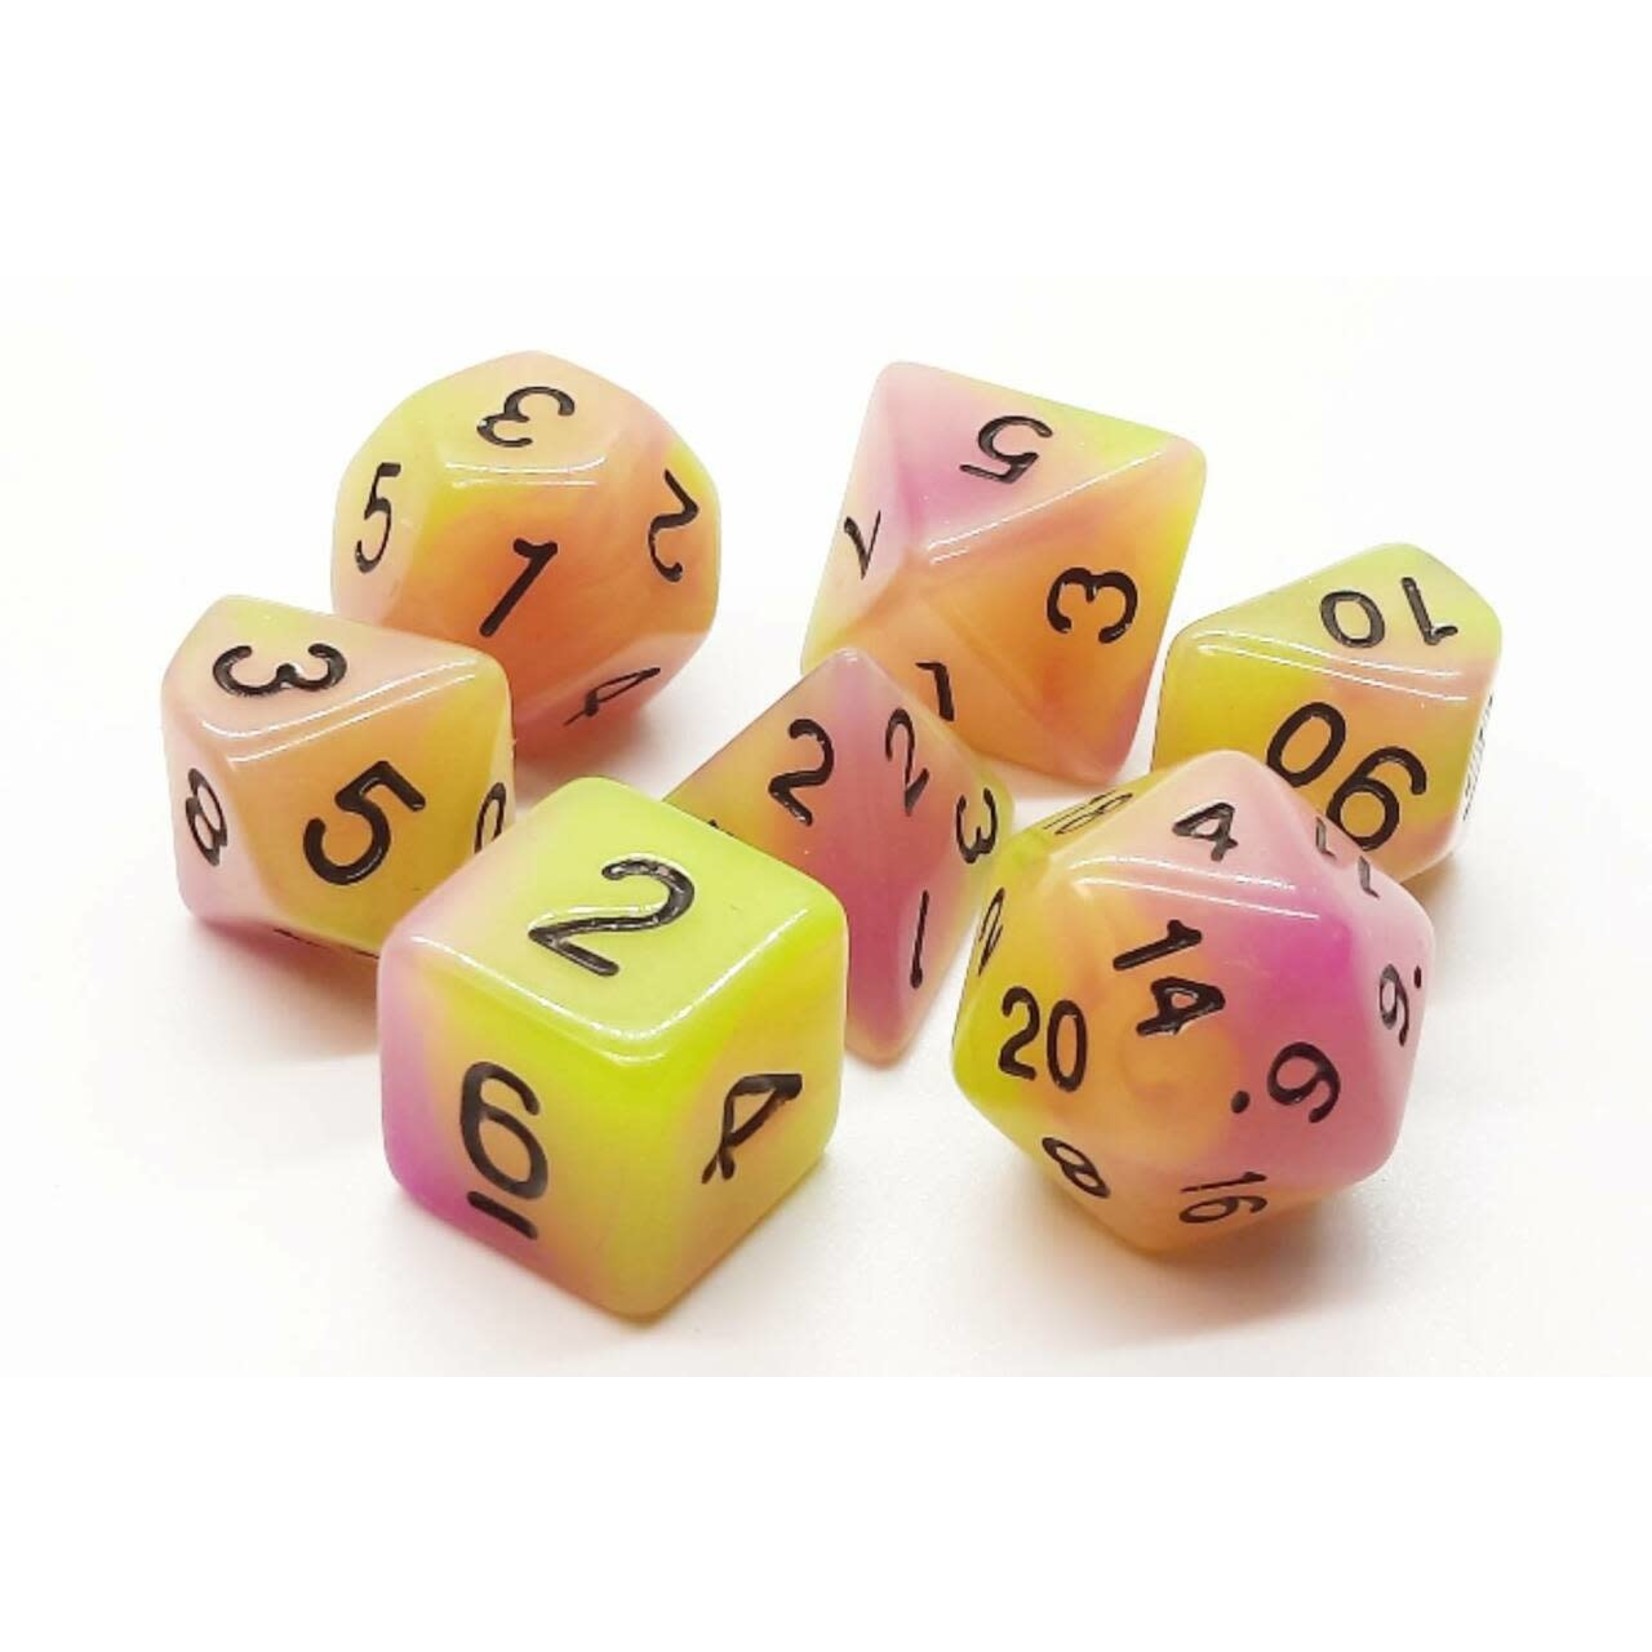 Old School 7 Piece Dice Set: Glow in the Dark - Yellow and Purple